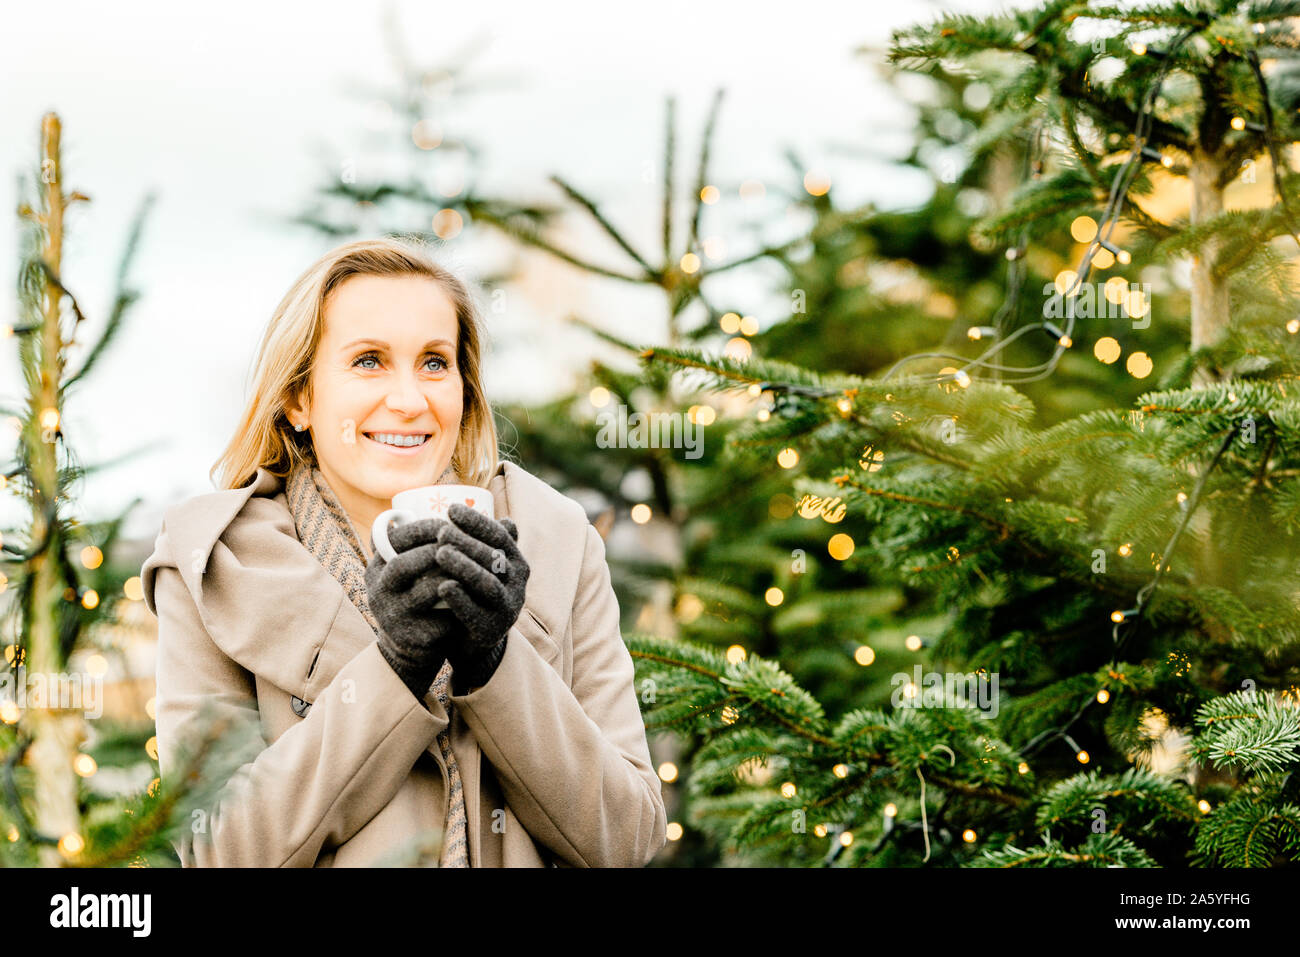 portrait of a happy woman holding a hot drink in her hand surrounded by christmas lights on trees Stock Photo